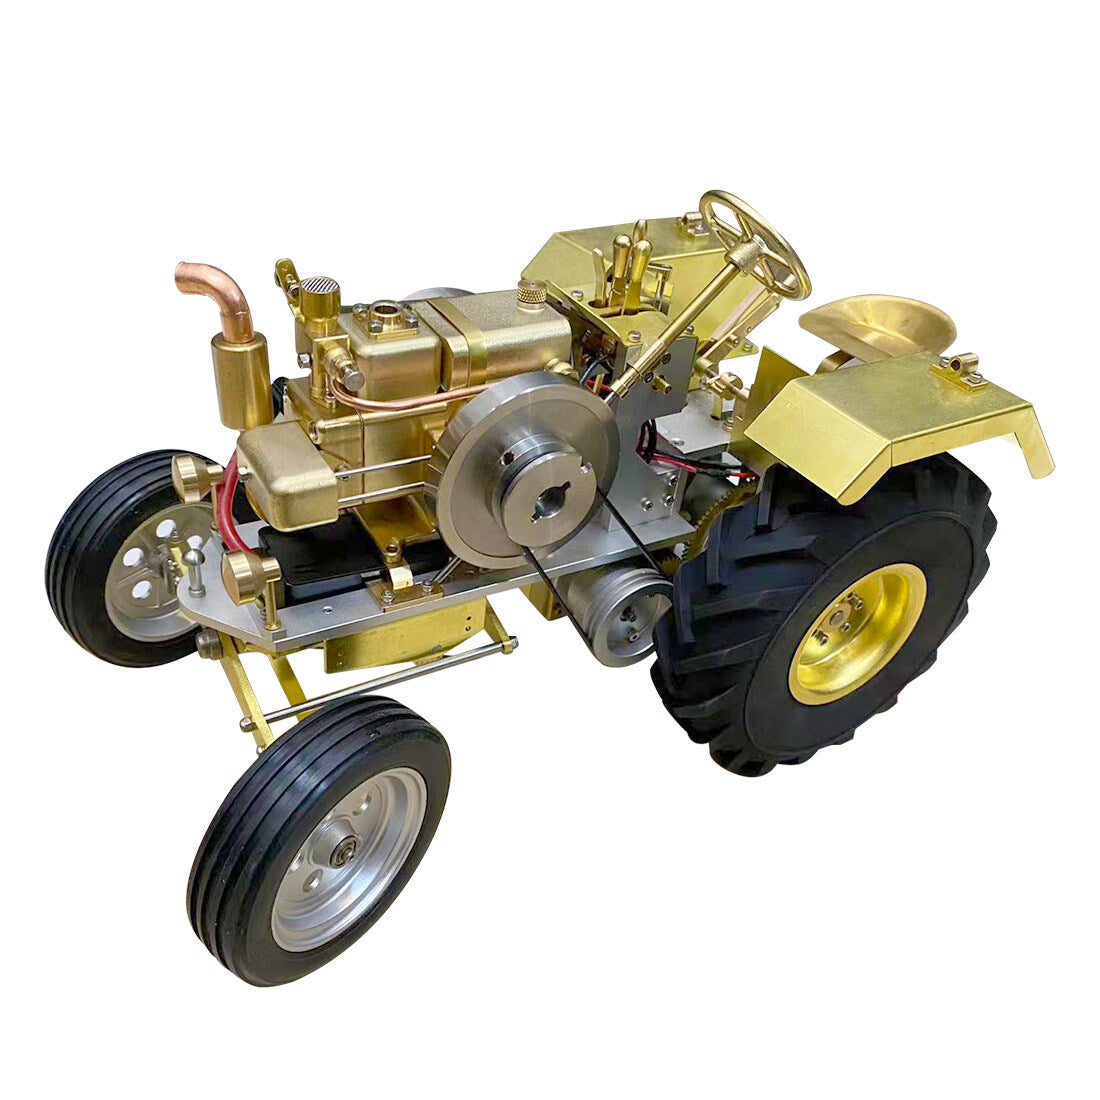 T12 Antique Roller Tractor Model Featuring a 1.6cc Mini Horizontal Single-Cylinder Water-Cooled Gasoline IC Engine——Enginediyshop